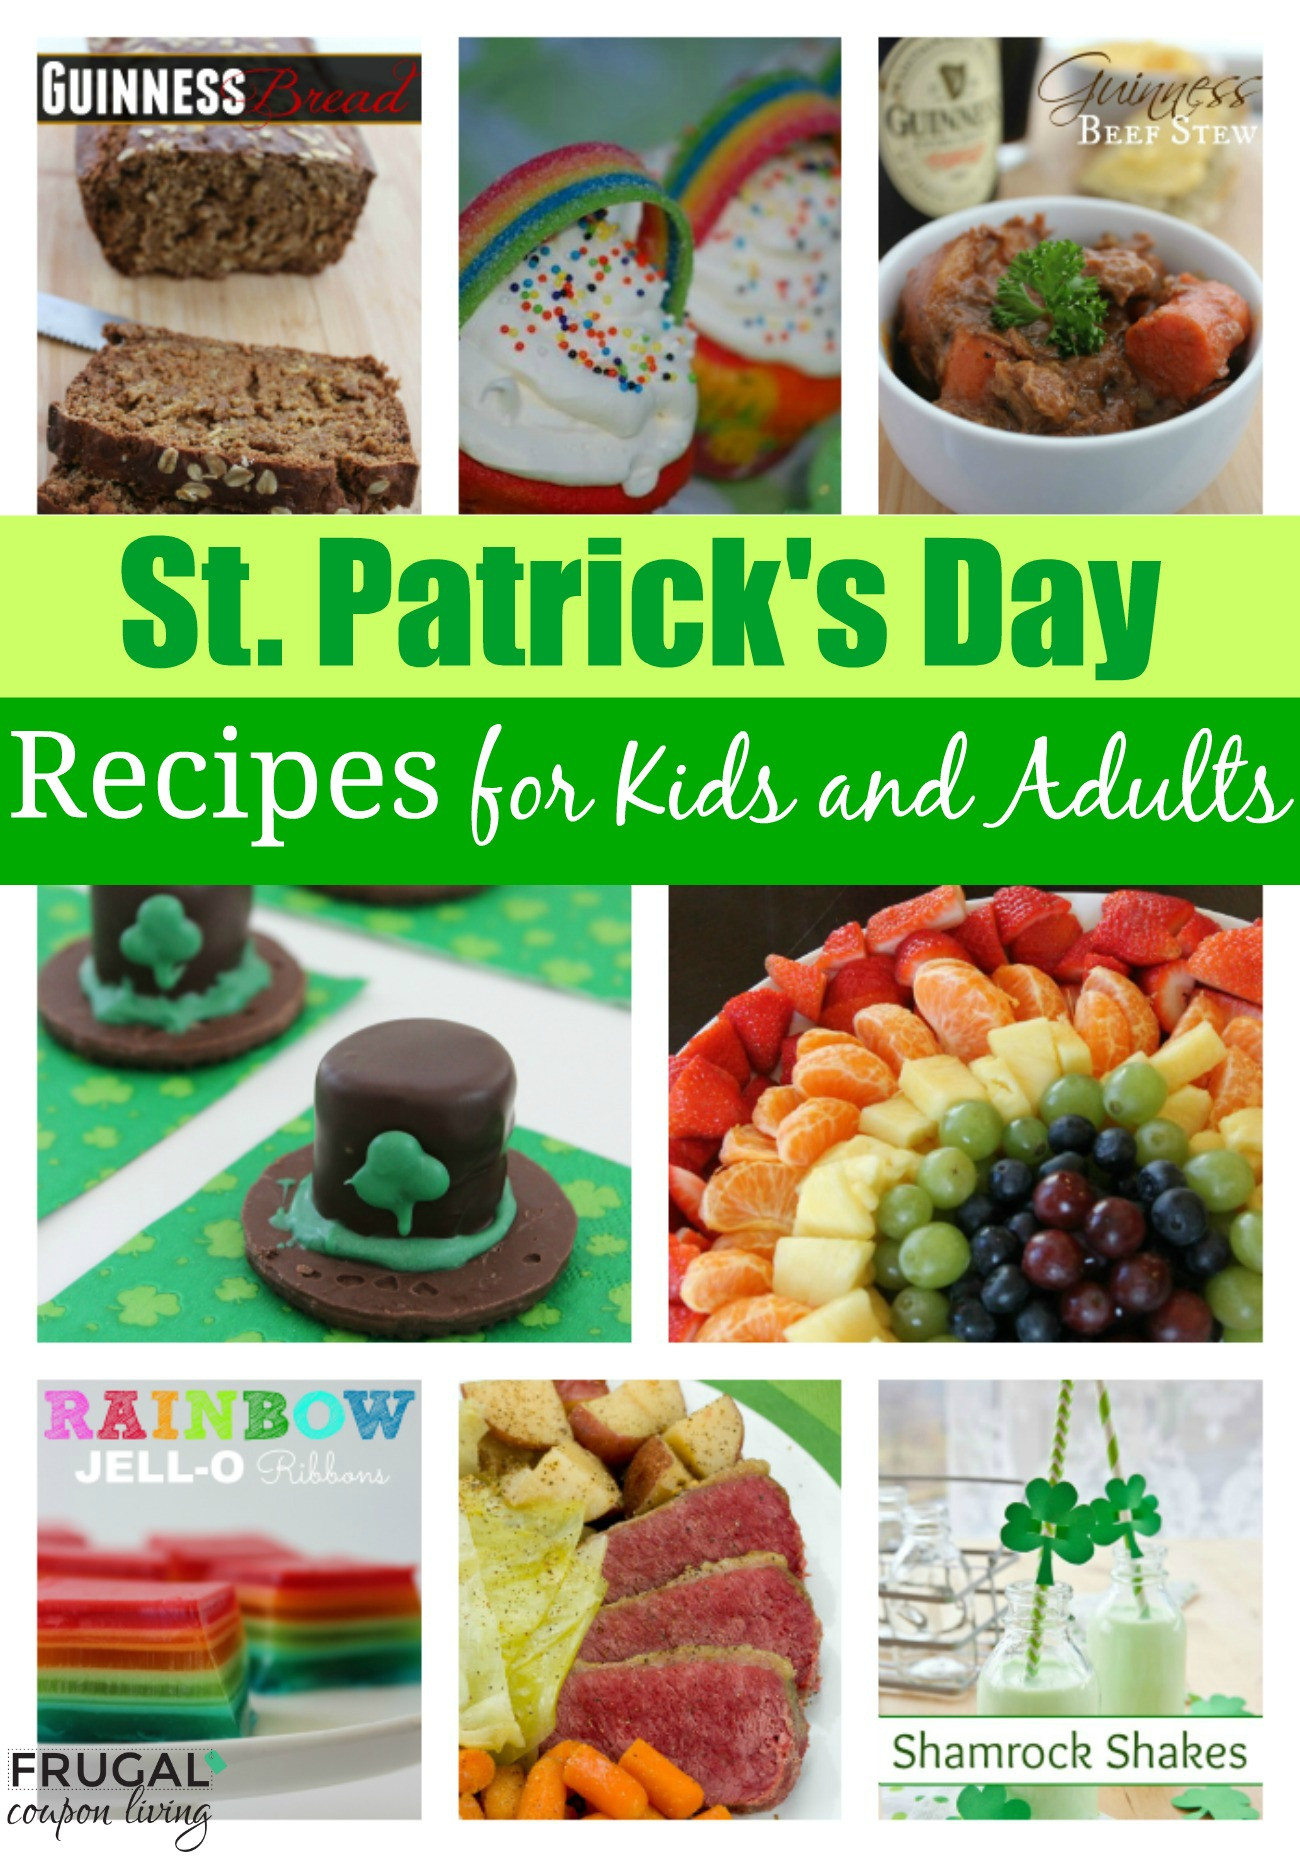 St Patrick's Day Lunch Ideas
 St Patrick s Day Food Ideas for Kids and Adults